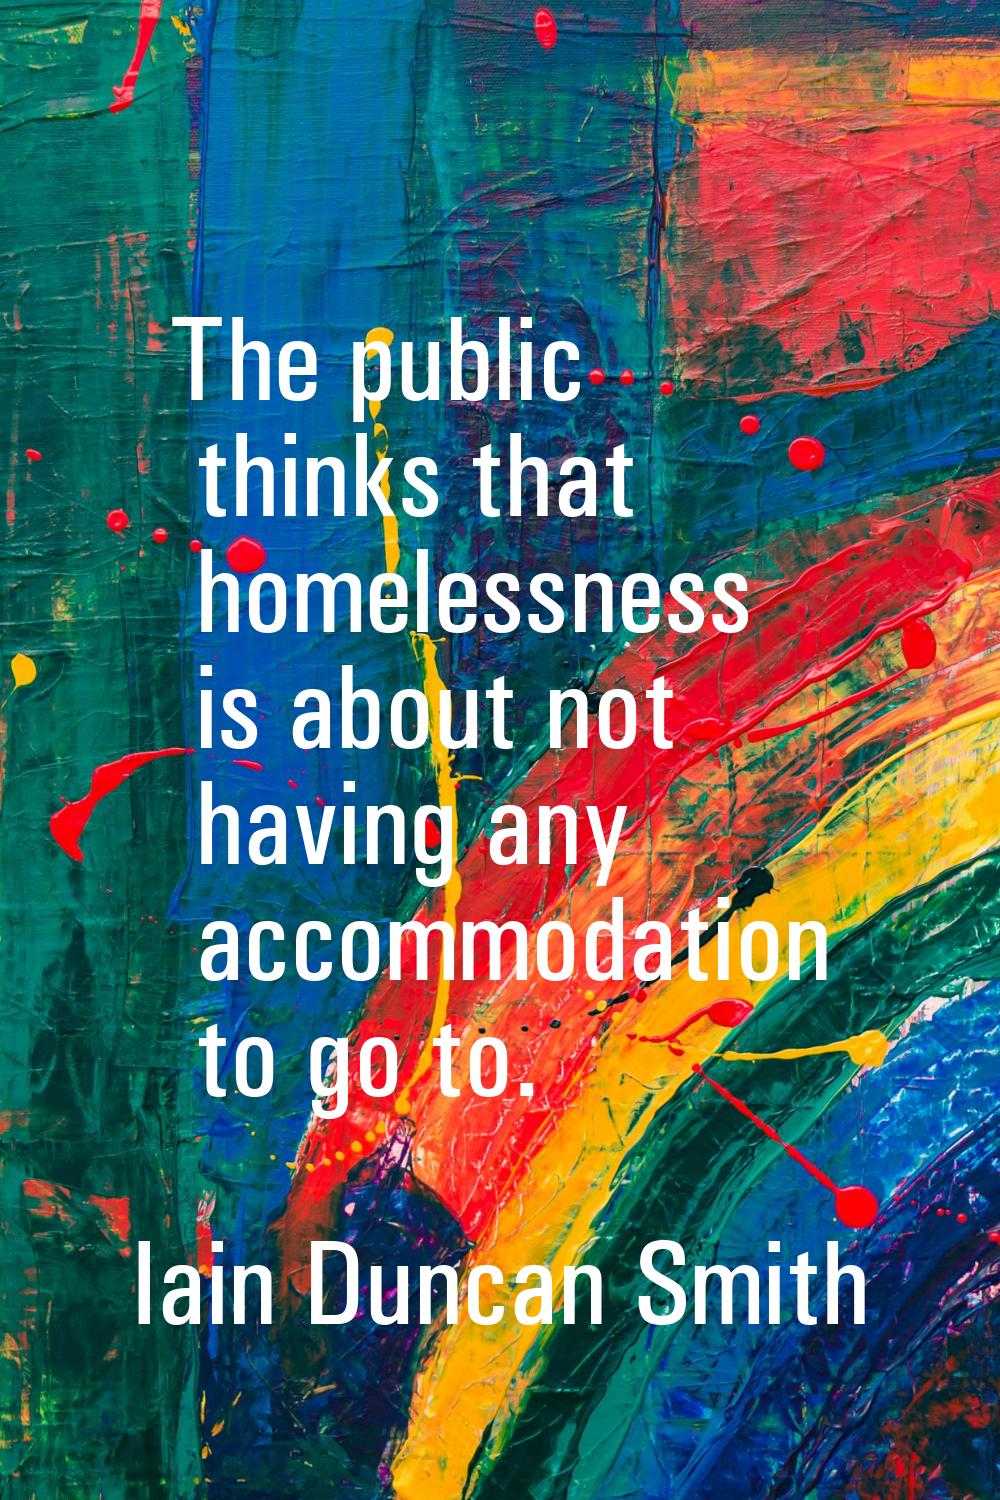 The public thinks that homelessness is about not having any accommodation to go to.